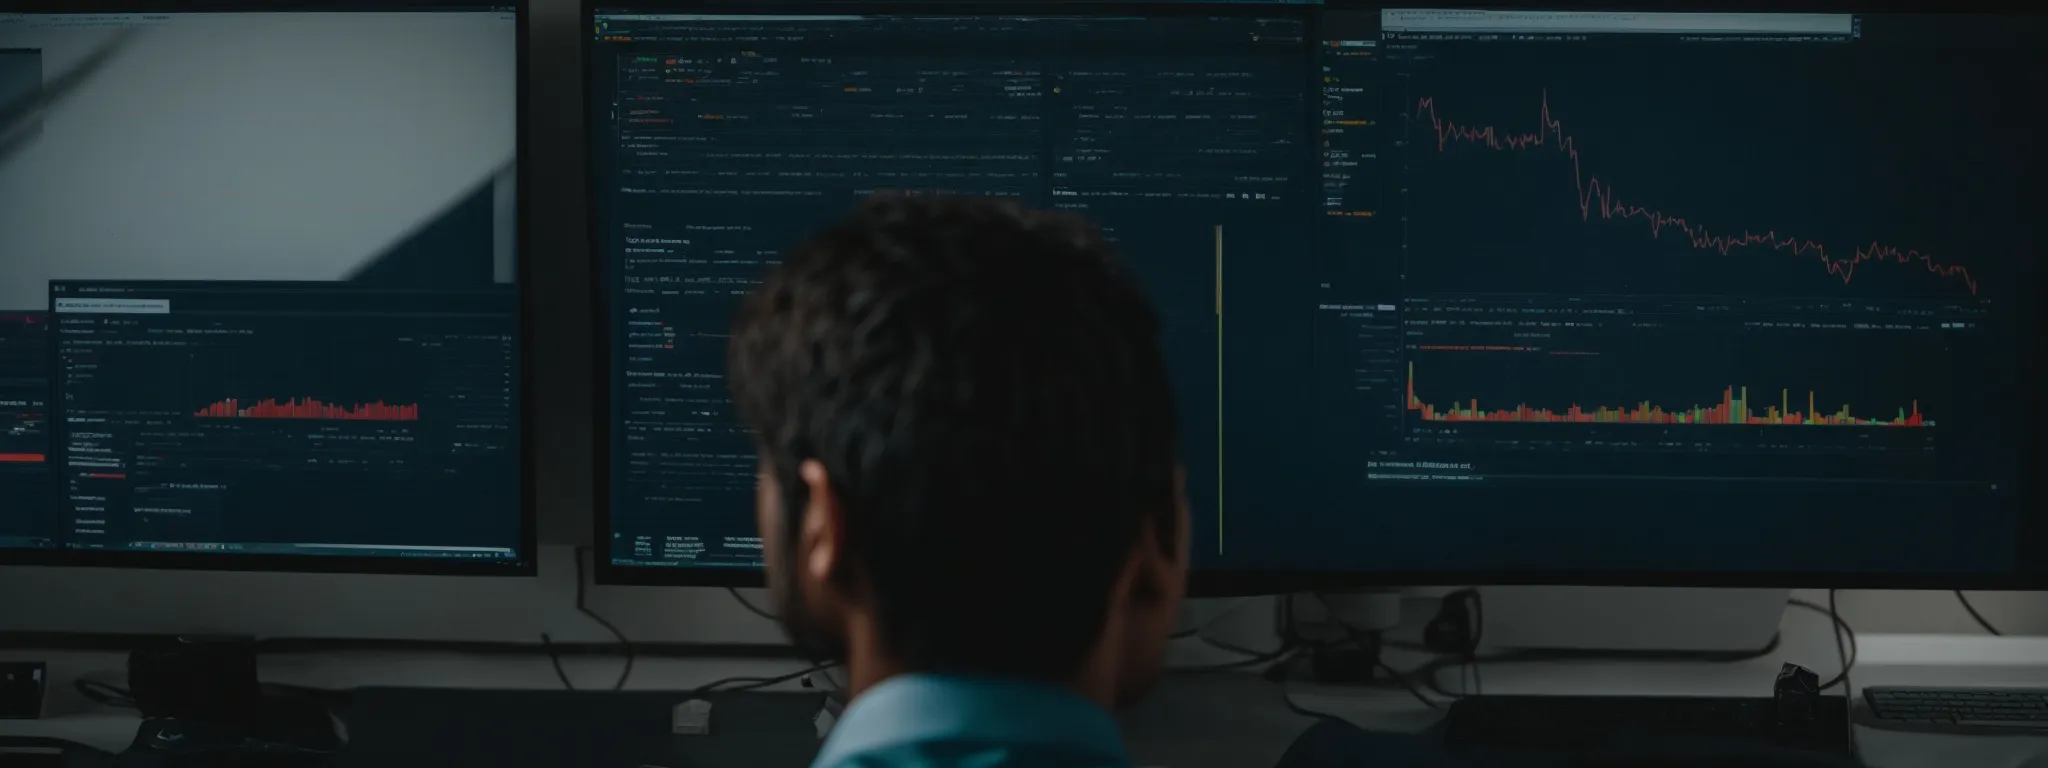 a person is analyzing complex seo analytics on a monitor with an enhanced firefox status bar visible on the screen.